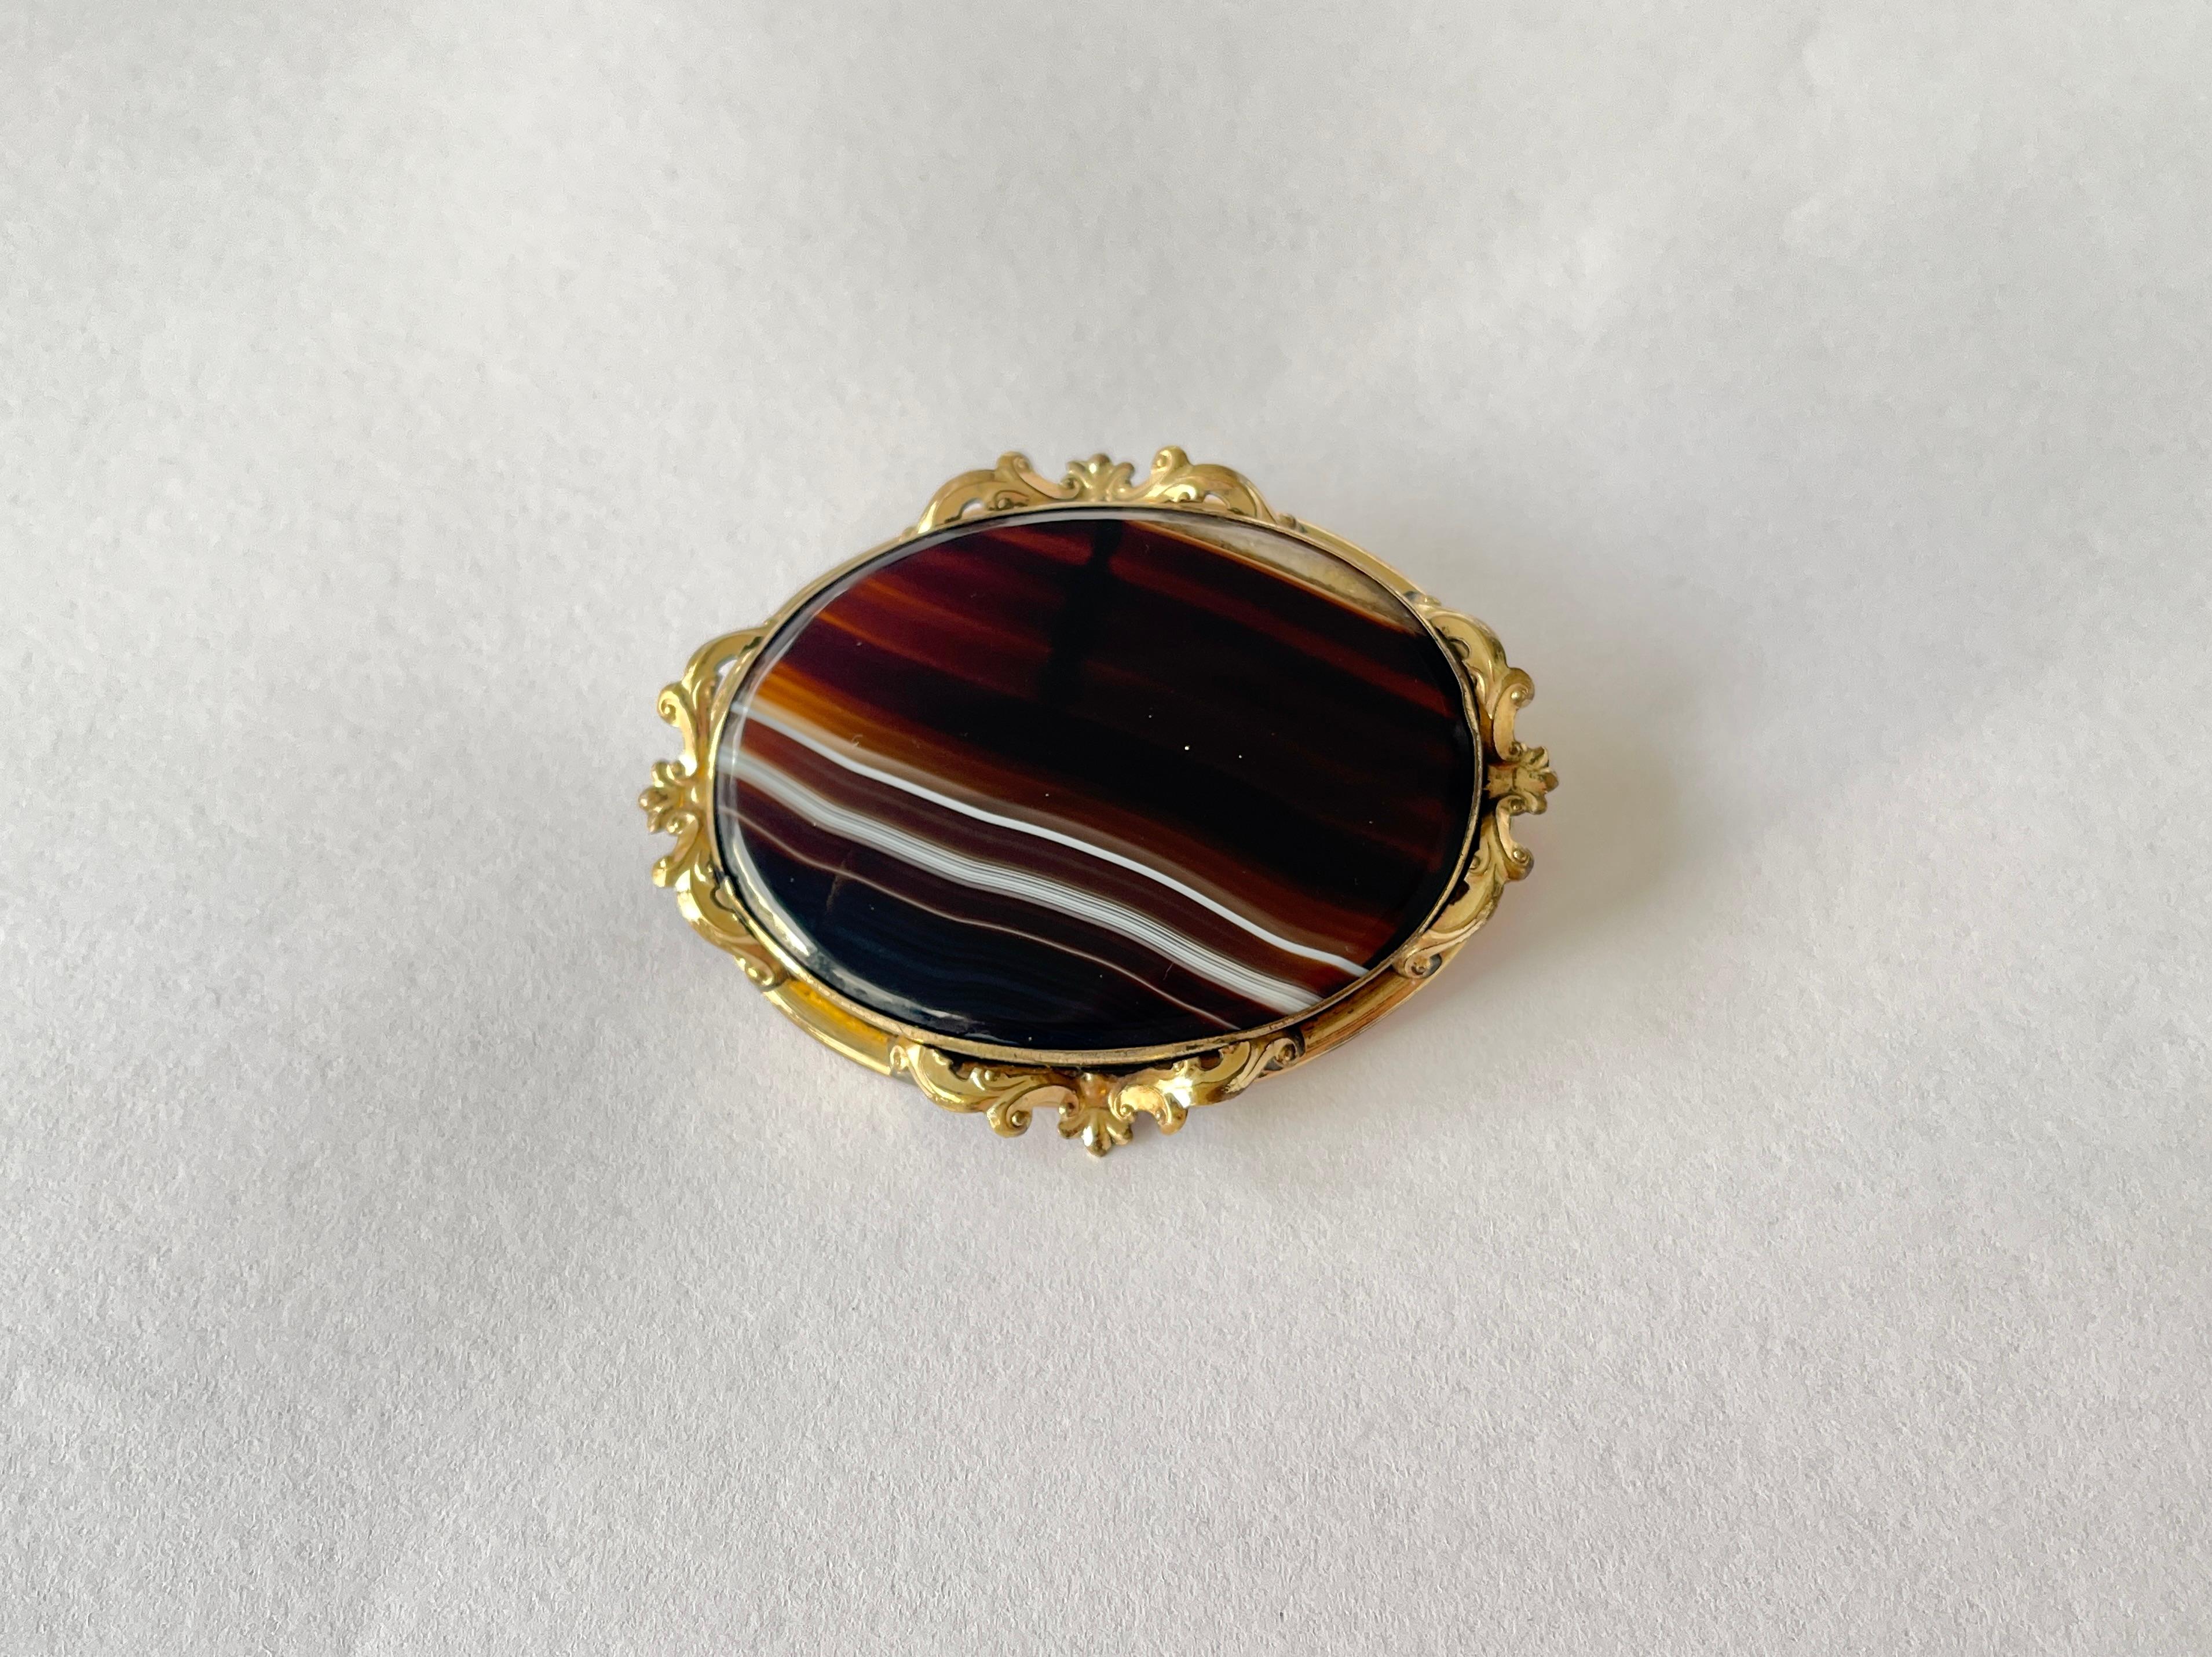 This lovely brooch is big and bold!
It features a piece of brown, caramel and white striped banded agate that is oval in shape.  It is set in gold gilt with nice detail of the fleur de lis and scrolling leaves.  
This is a large piece measuring over